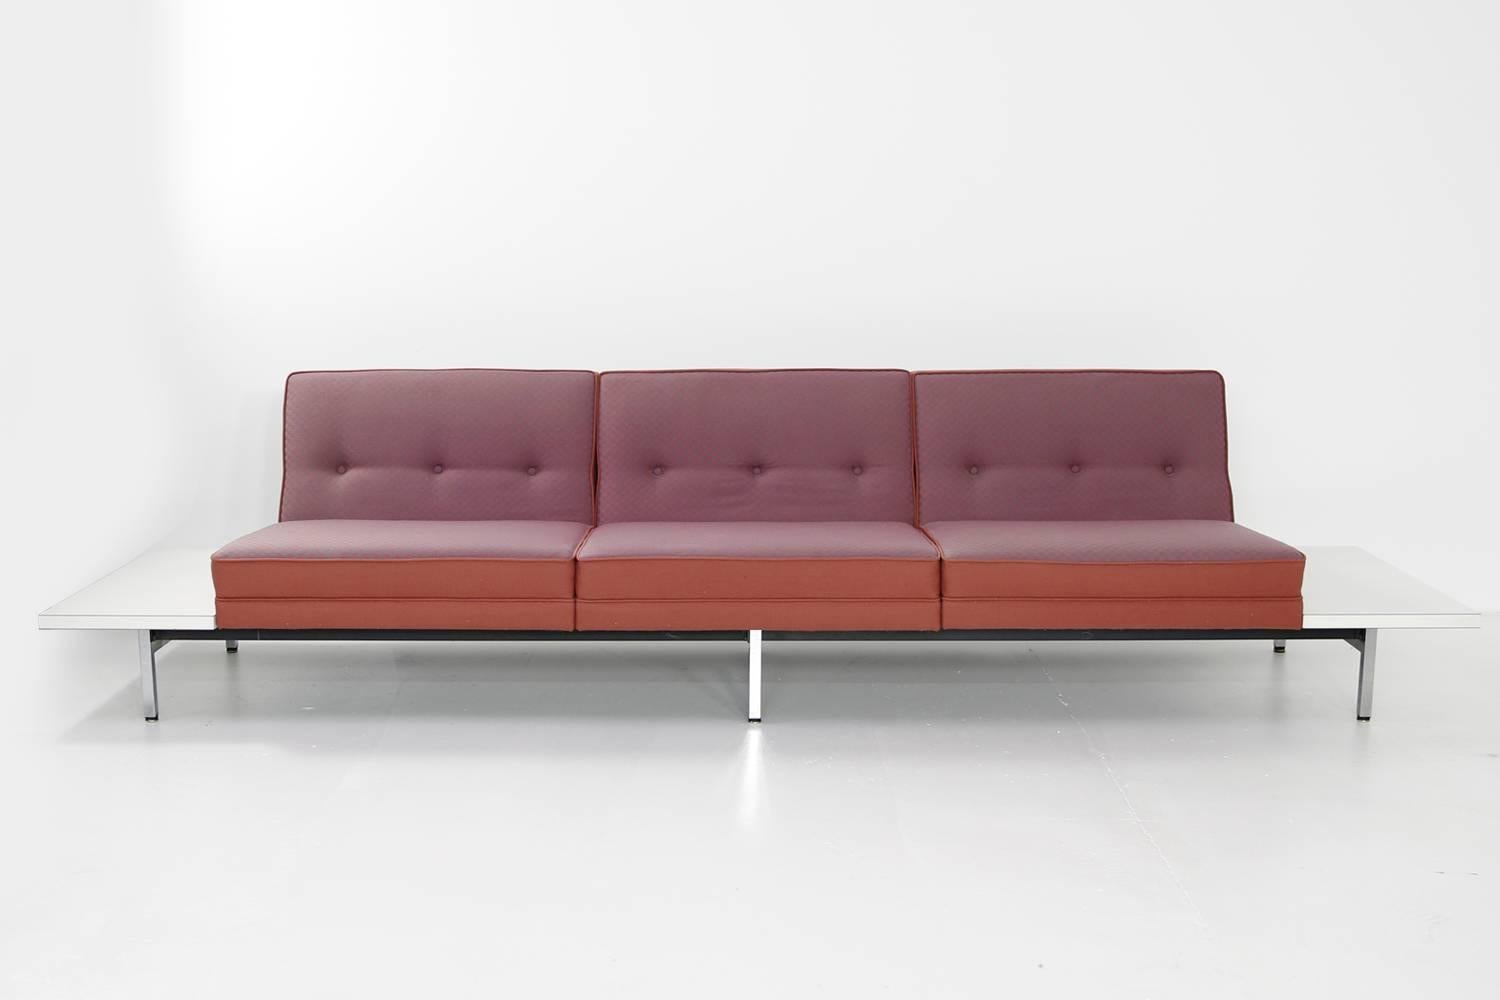 Rare and large modular sofa by George Nelson for Herman Miller. Seats and tables can be arranged as desired, heavy weight iron base with chrome legs.

Two-seat with tables ca. 305 x 76 x 70cm SH 40cm
Three-seat with tables ca. 350 x 76 x 70cm SH